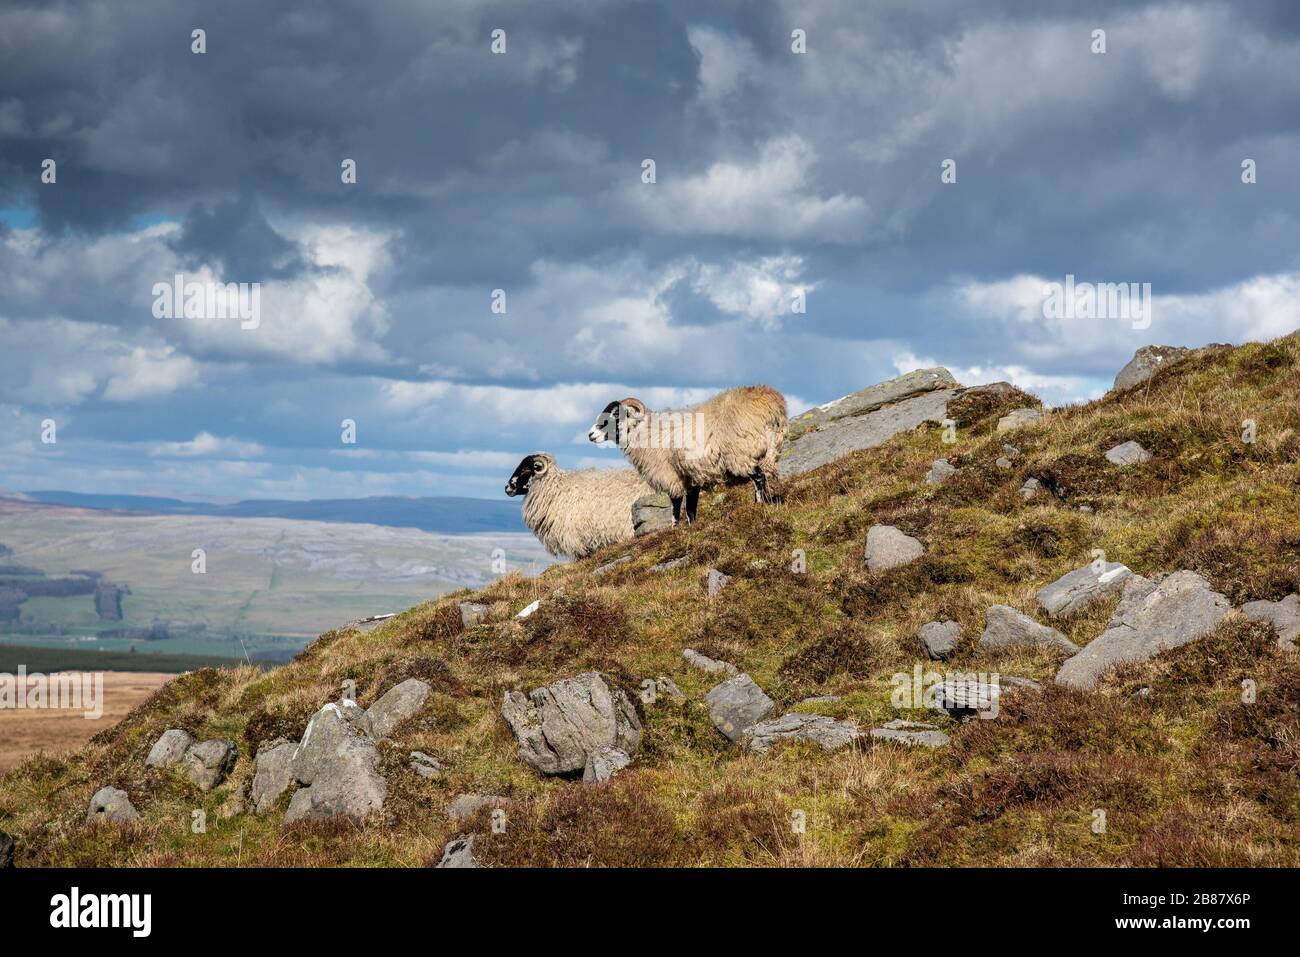 Lancaster, Lancashire, UK. 20th Mar, 2020. Two sheep in the fine weather at Bowland Knotts, Forest of Bowland near Lancaster, Lancashire. Credit: John Eveson/Alamy Live News Stock Photo